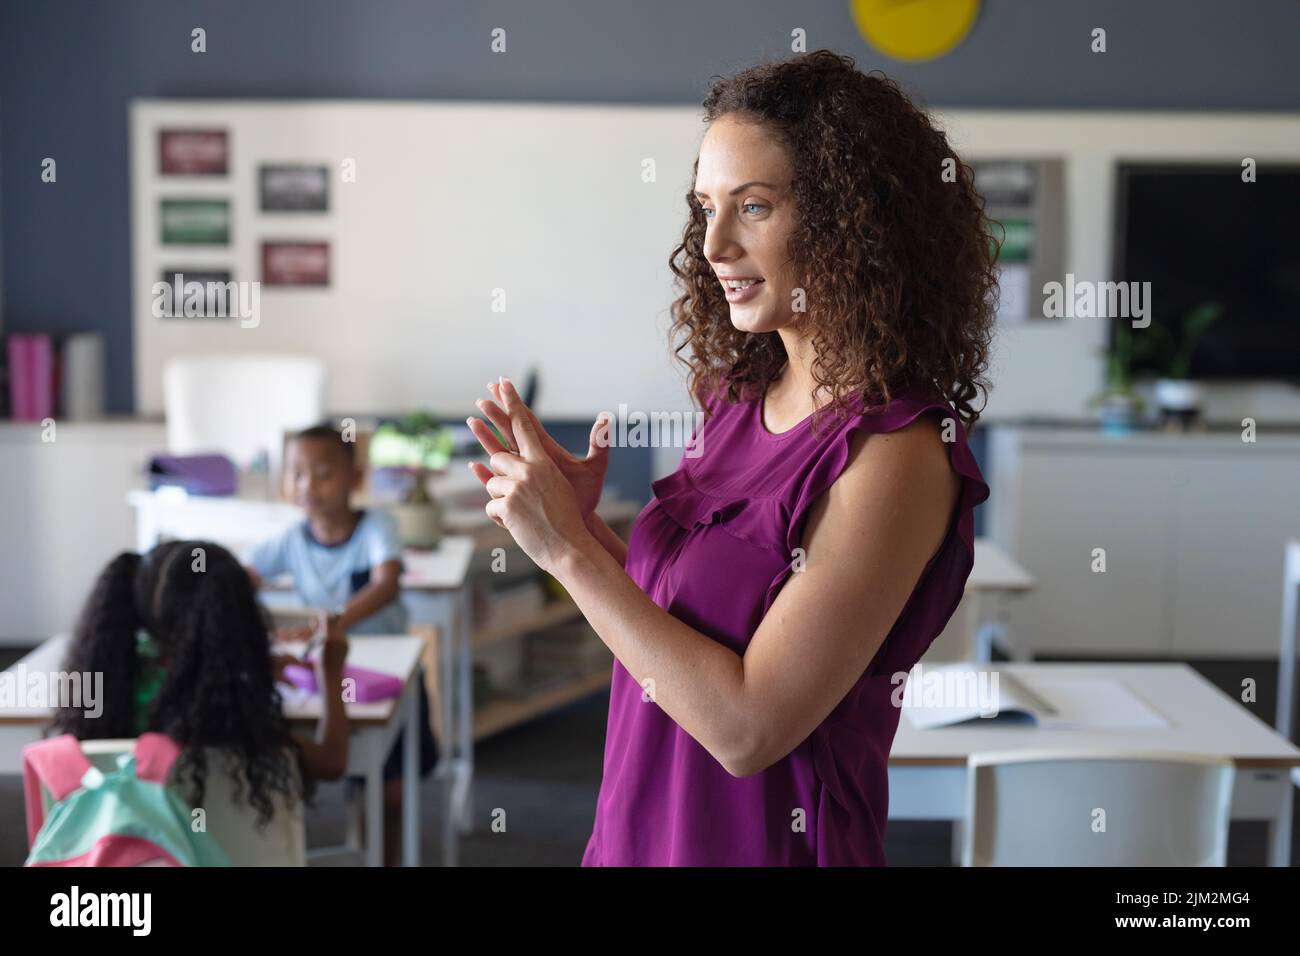 Caucasian young female teacher with curly hair gesturing while teaching in classroom Stock Photo